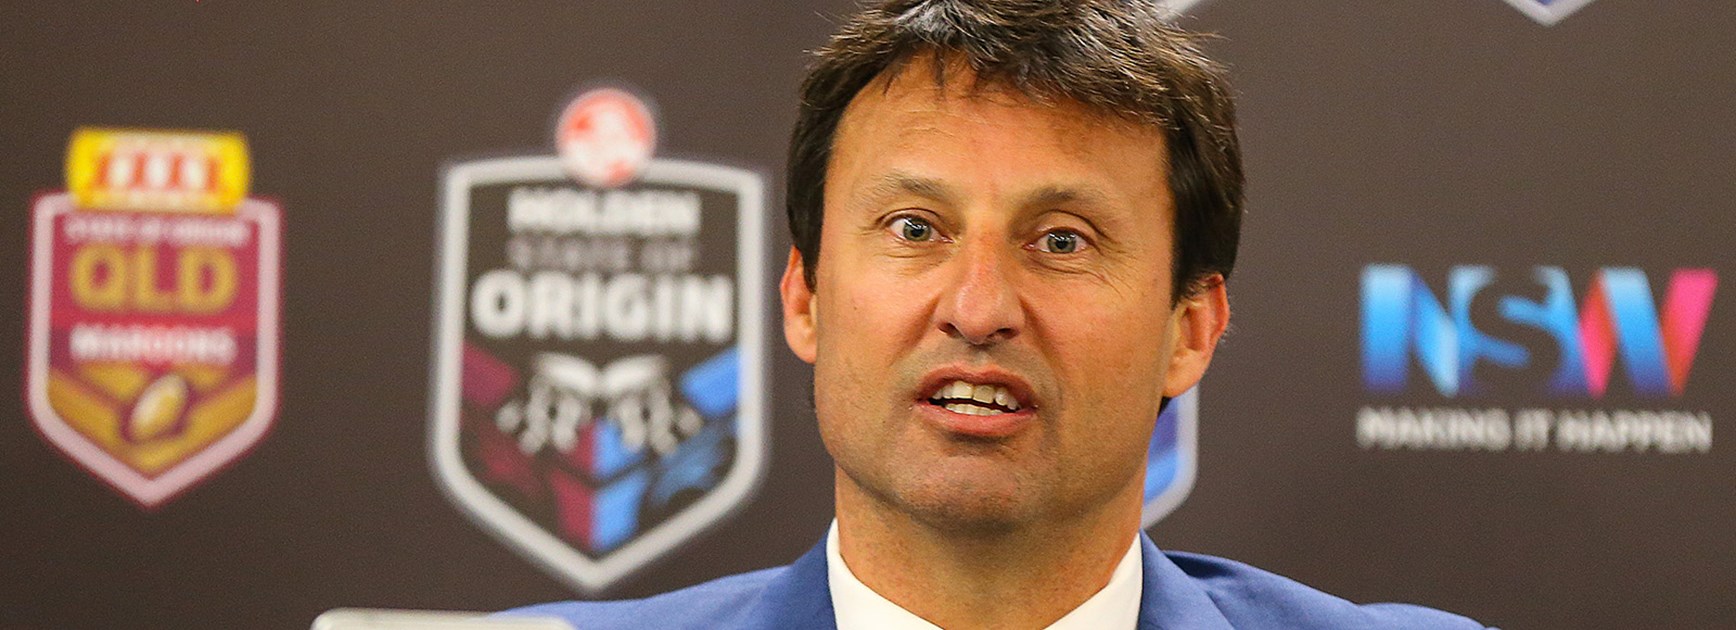 NSW coach Laurie Daley was relieved after a dramatic victory in Game Three.